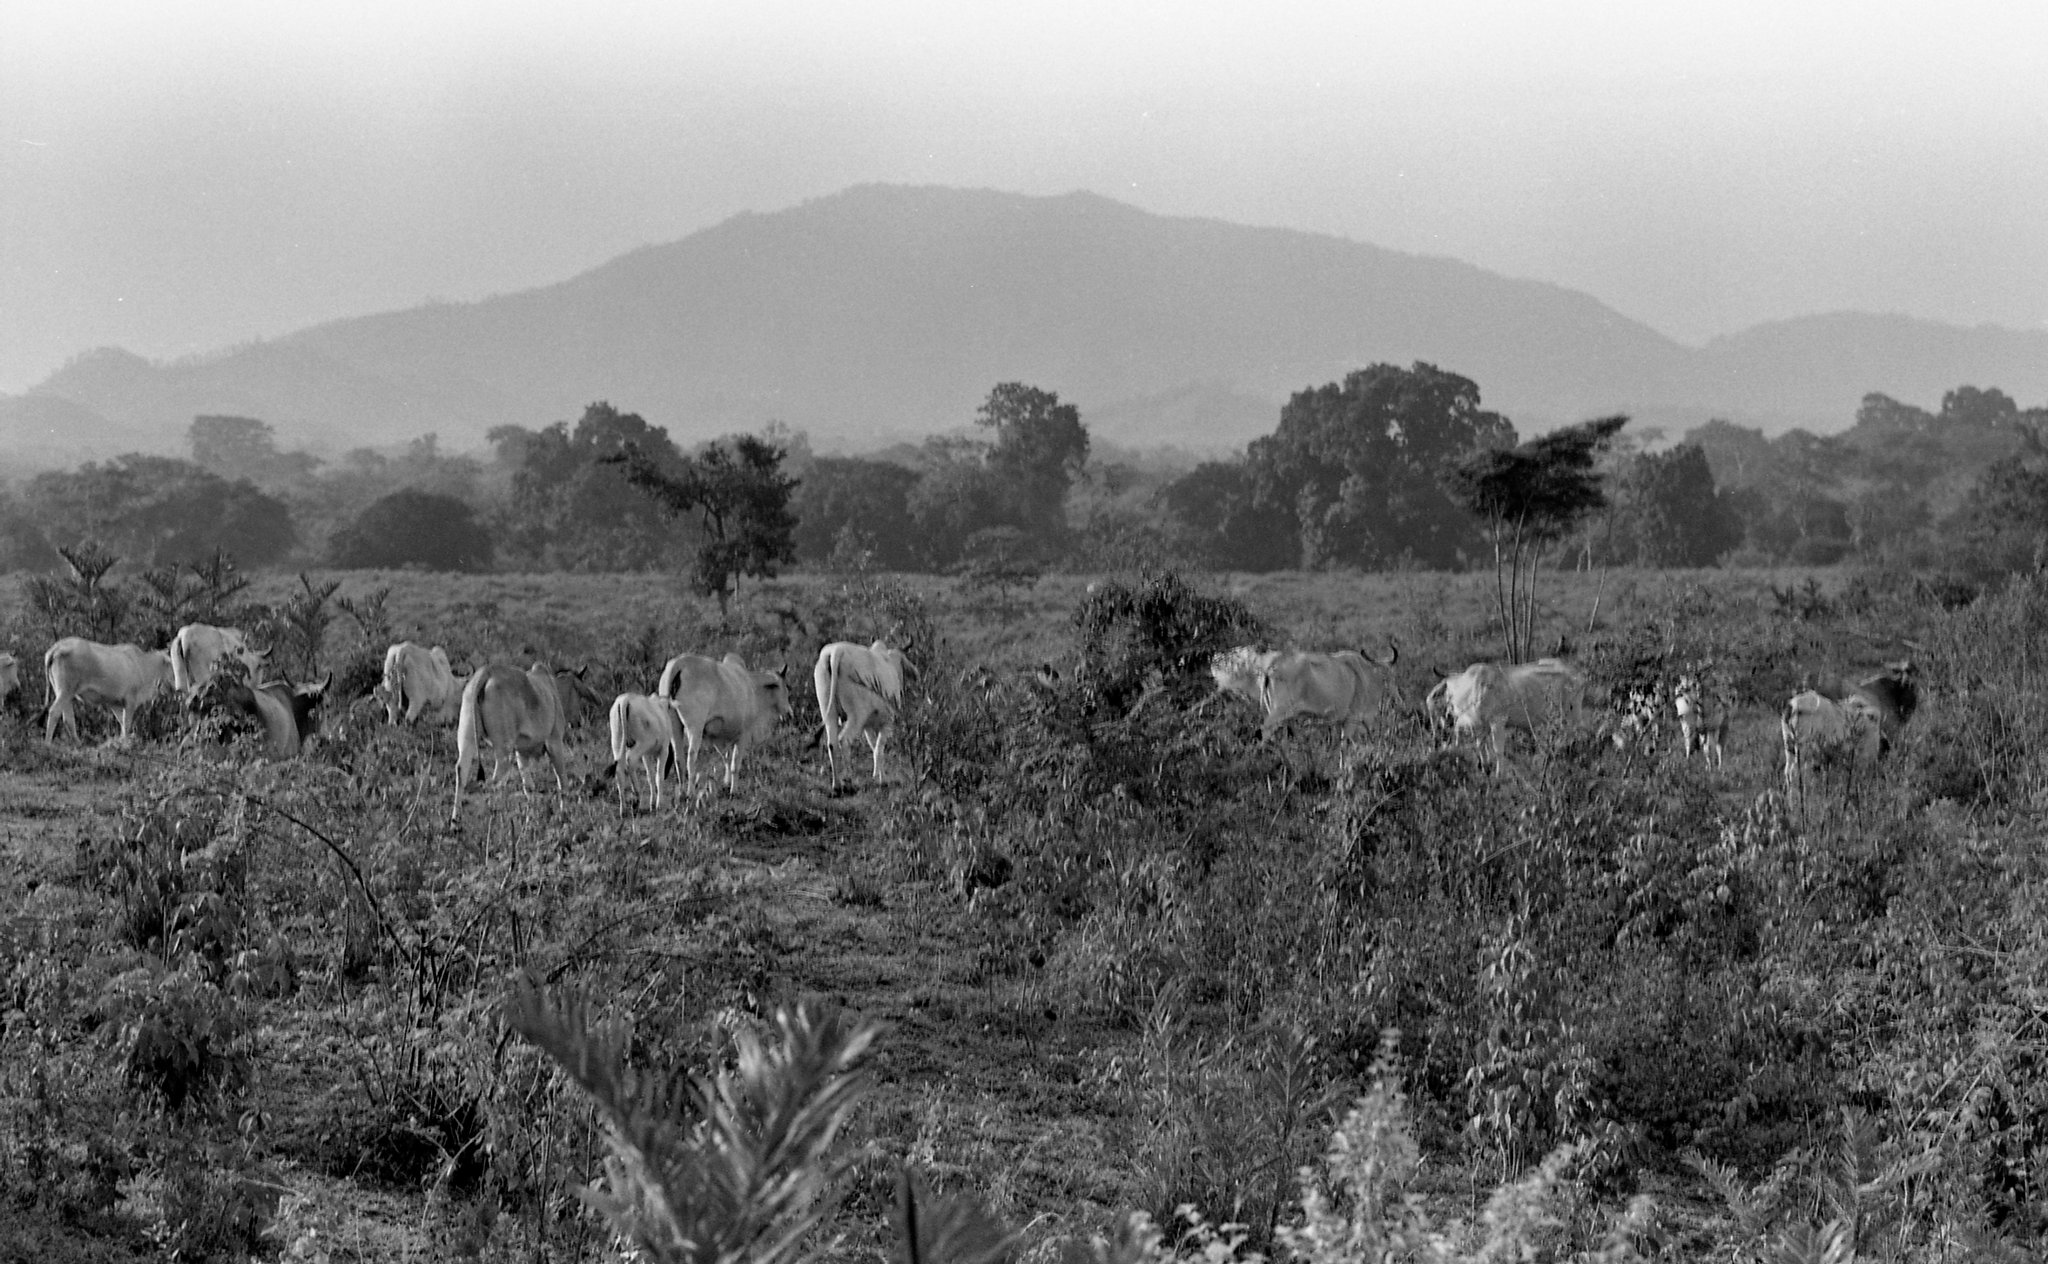 Landscape with cows in black and white